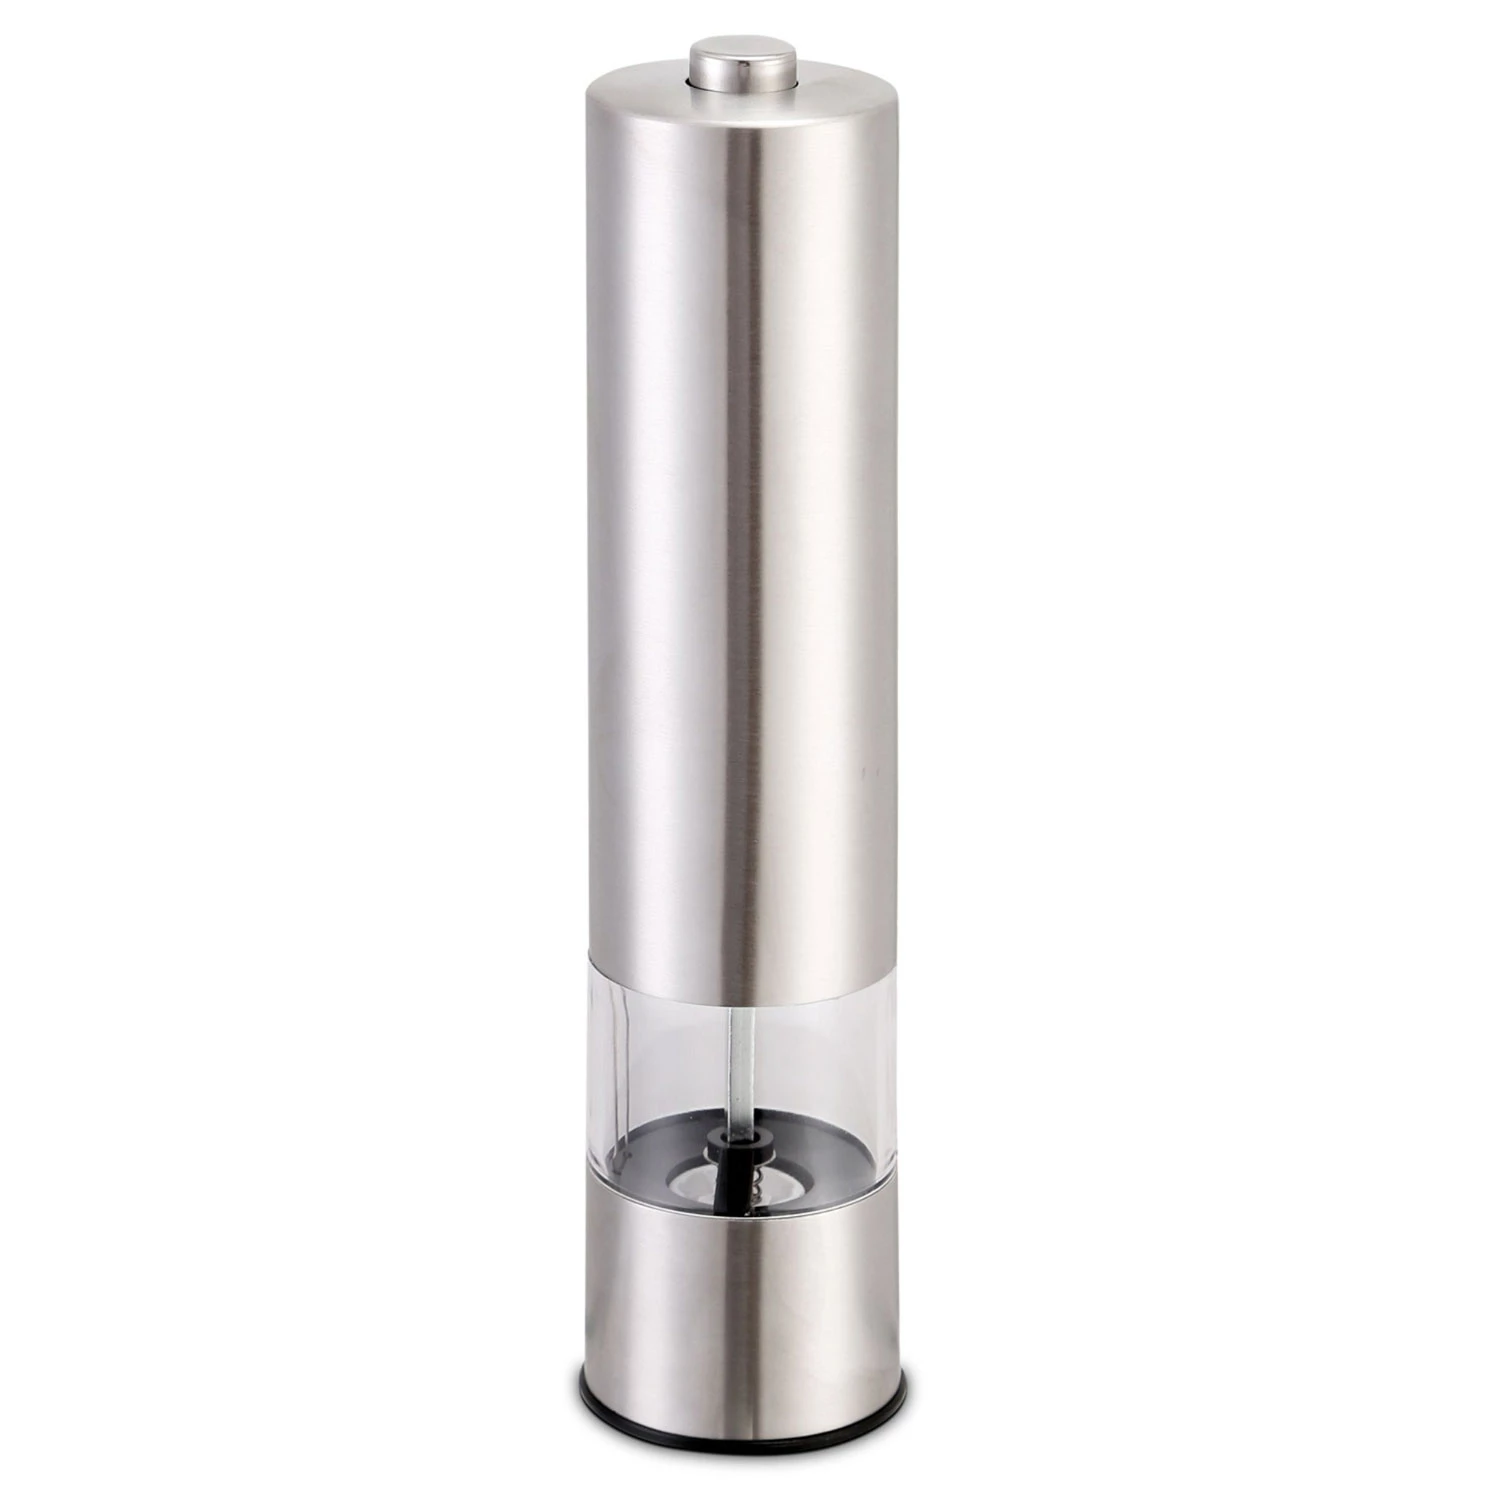 Stainless Steel Electric Salt Pepper Grinder - Adjustable Coarseness, Battery Operated, Easy Refill